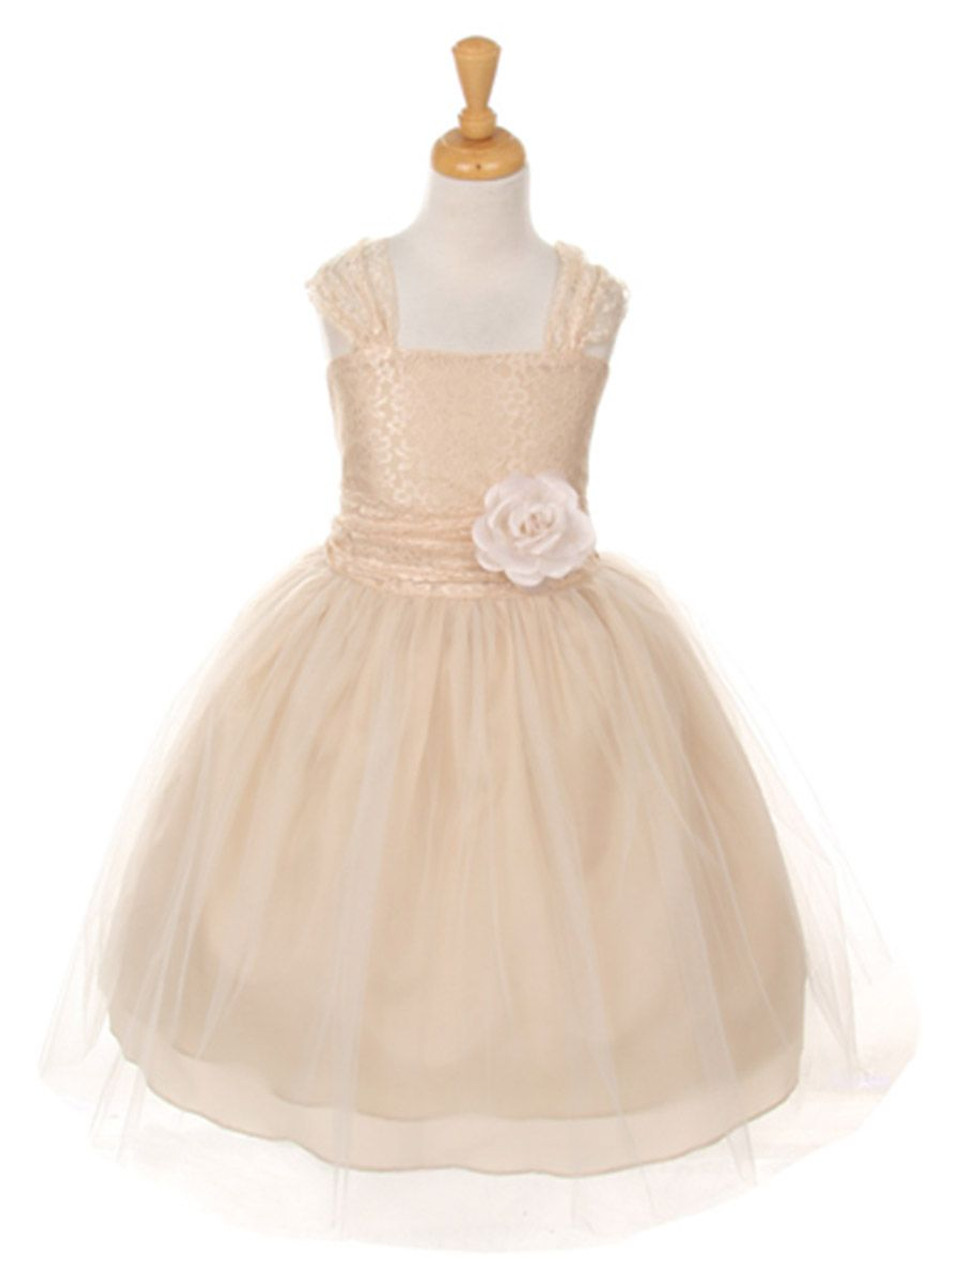 Champagne Floral Lace Dress w/ Cross Back & Tulle Skirt - Pink Princess